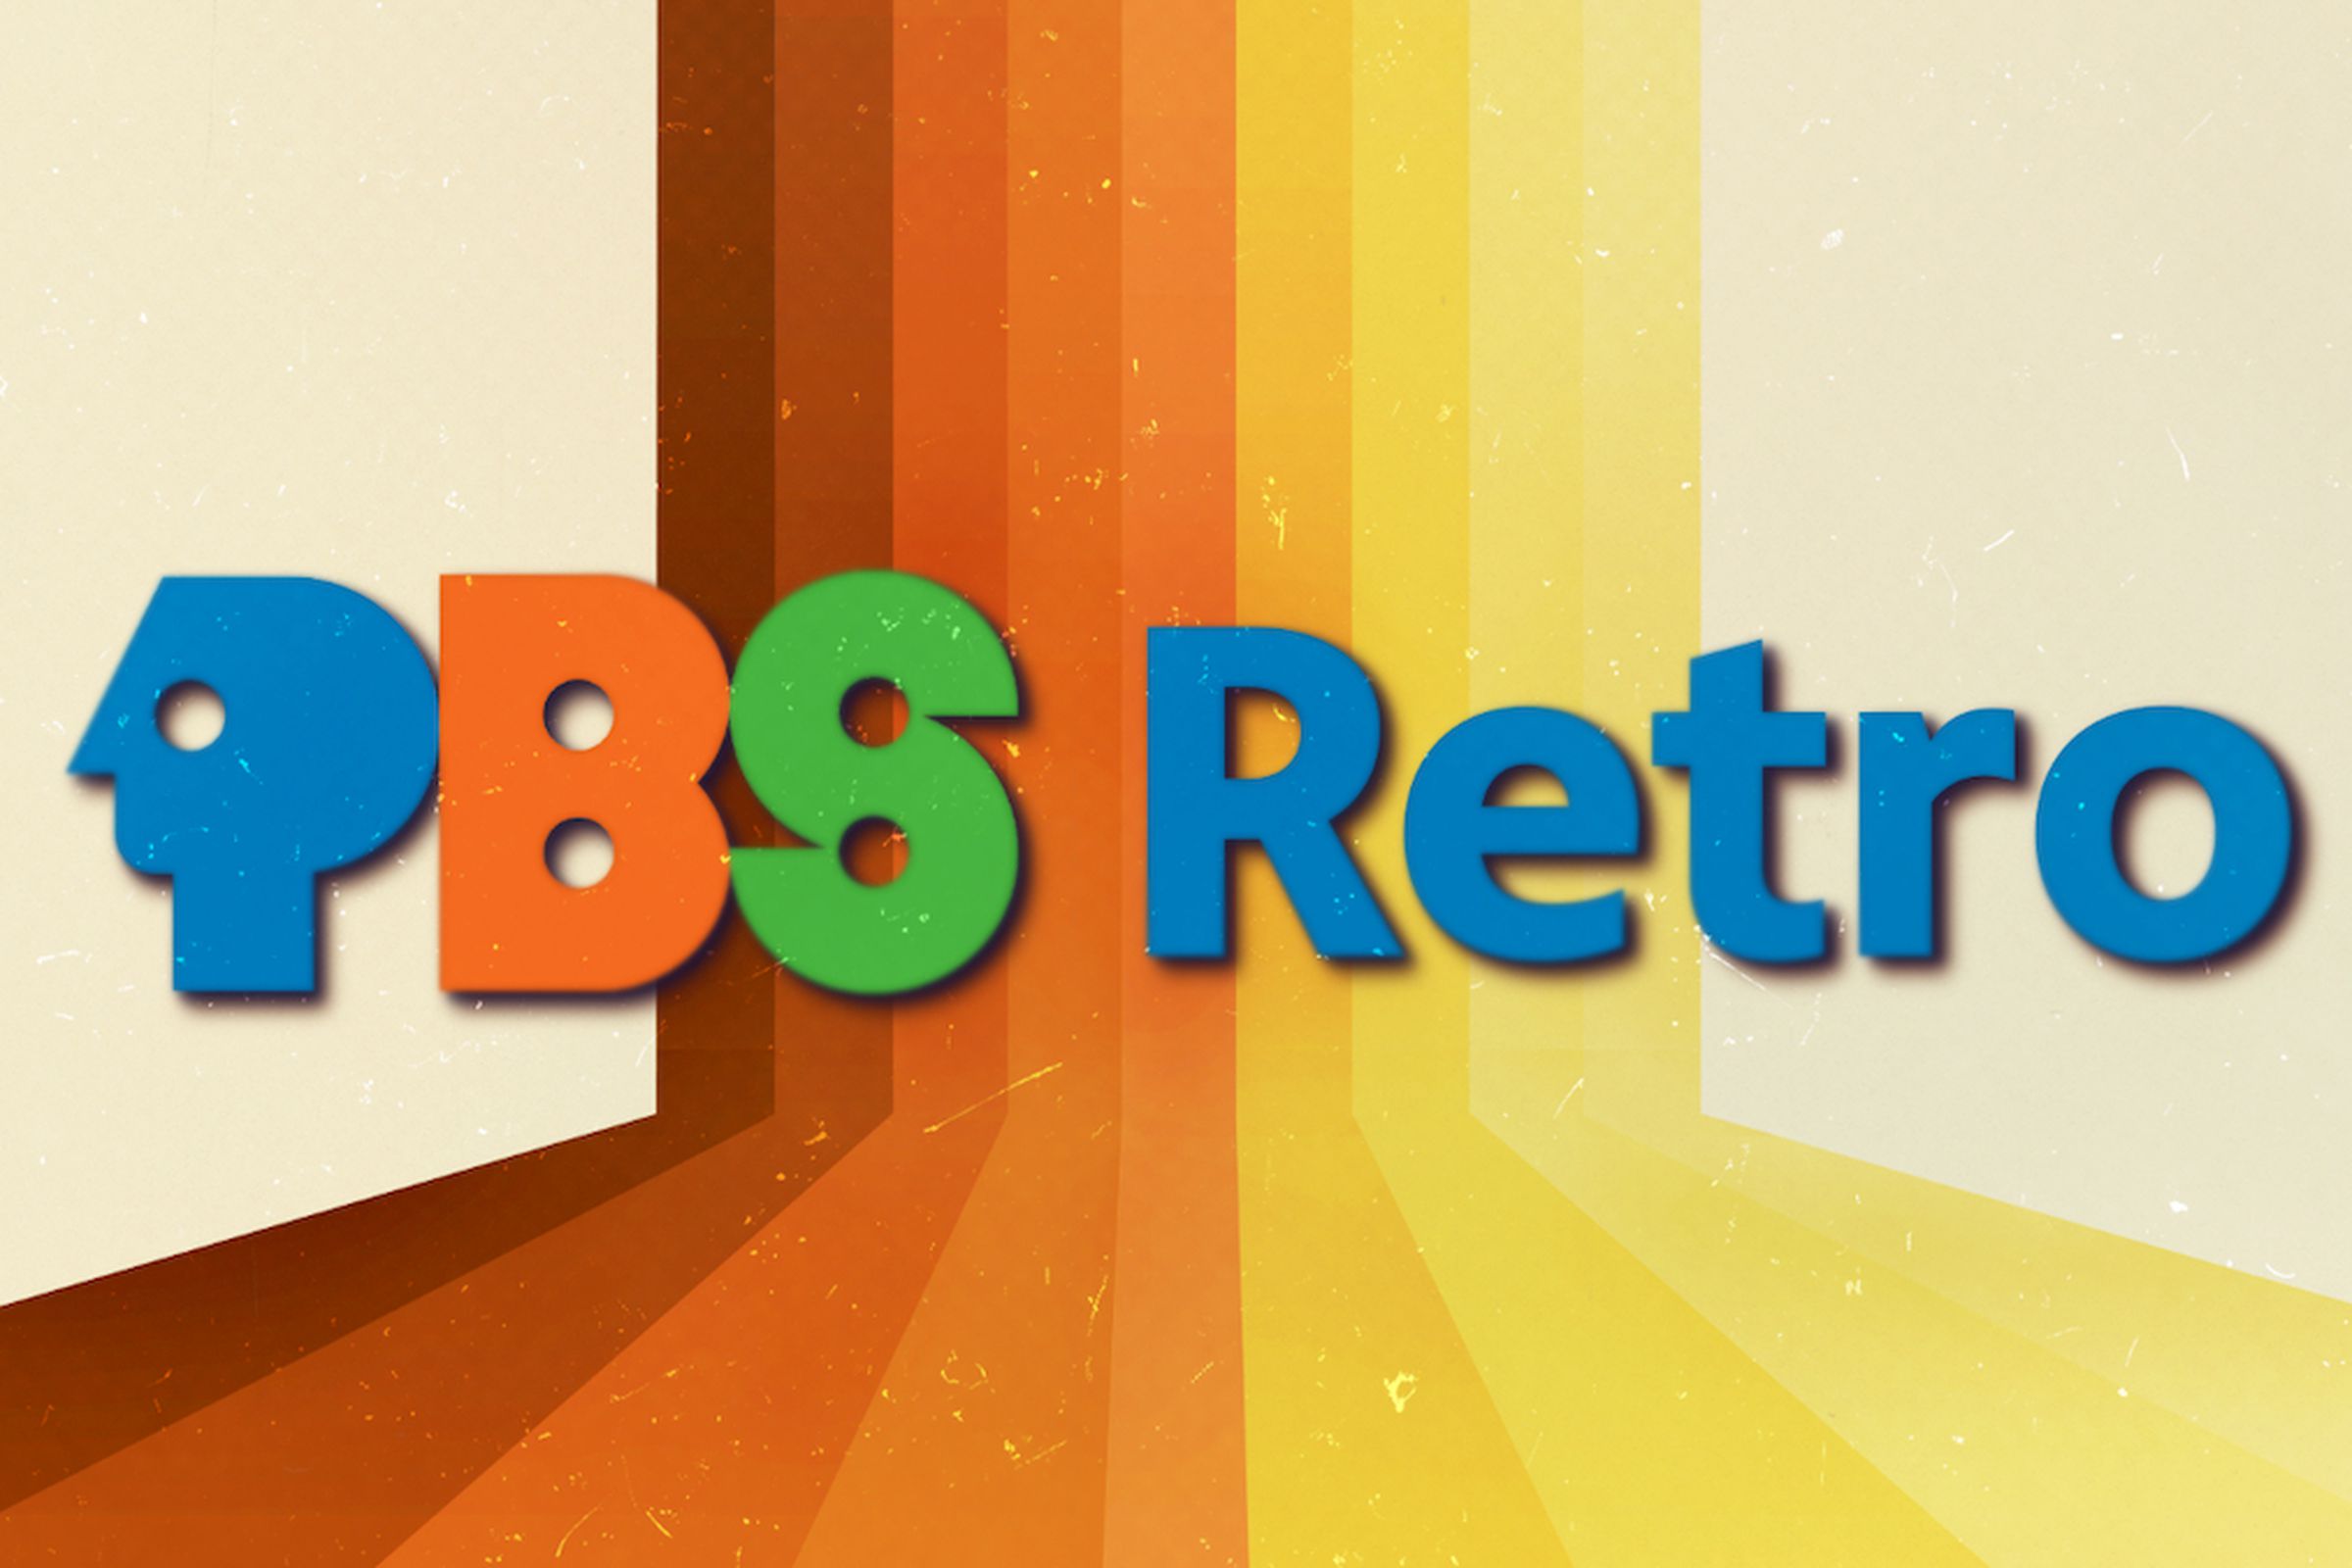 PBS Retro text logo with a film grain filter and a background VHS style rainbow with rustic burnt Sienna colors.